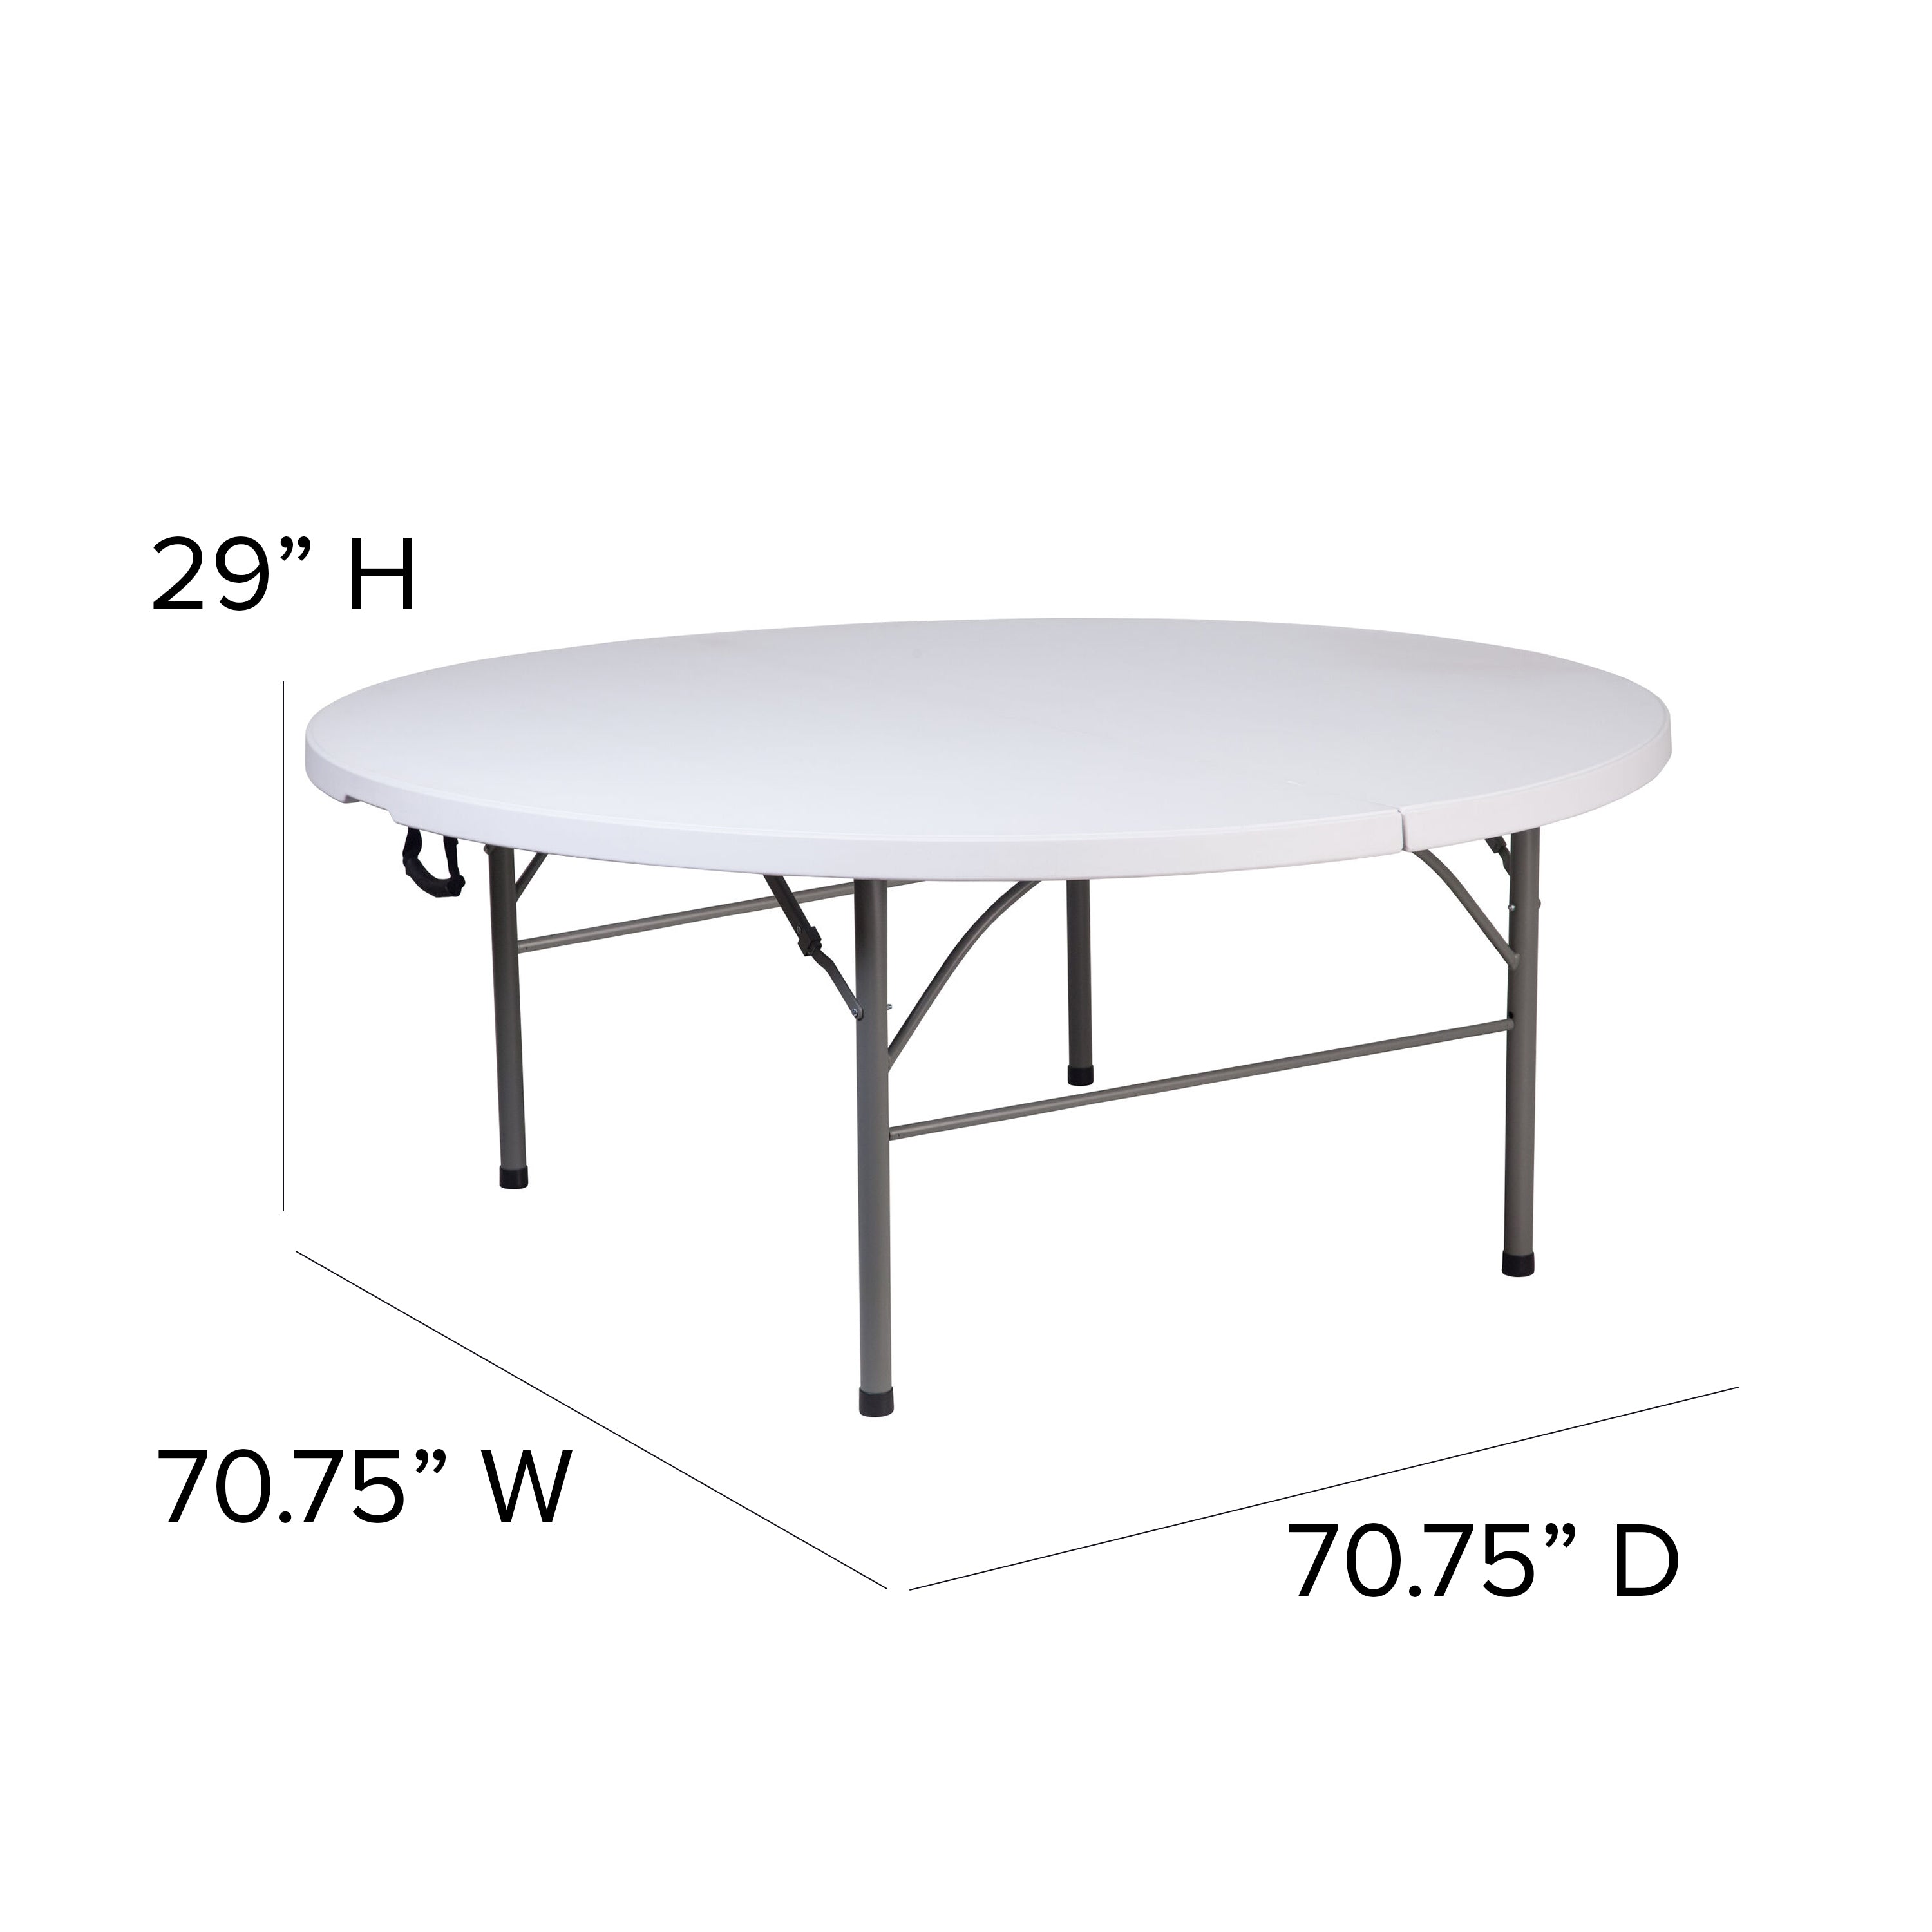 5.89-Foot Round Bi-Fold Plastic Banquet and Event Folding Table with Carrying Handle-Round Plastic Folding Table-Flash Furniture-Wall2Wall Furnishings